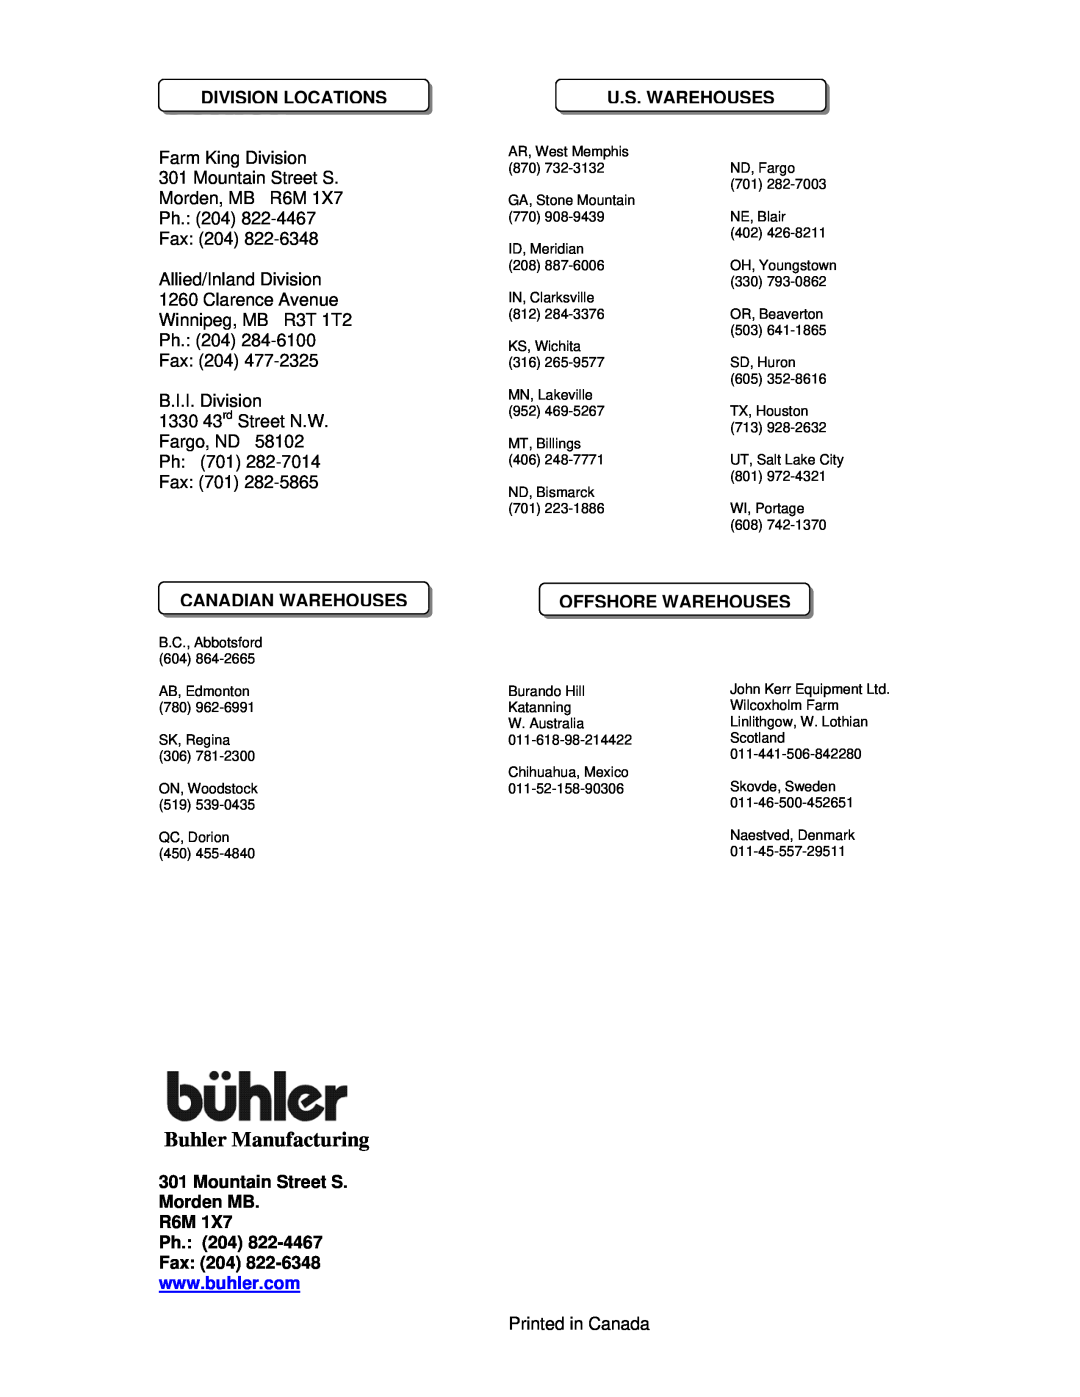 Buhler FK372 manual Buhler Manufacturing, Division Locations, Farm King Division 301 Mountain Street S, Ph 701 Fax 